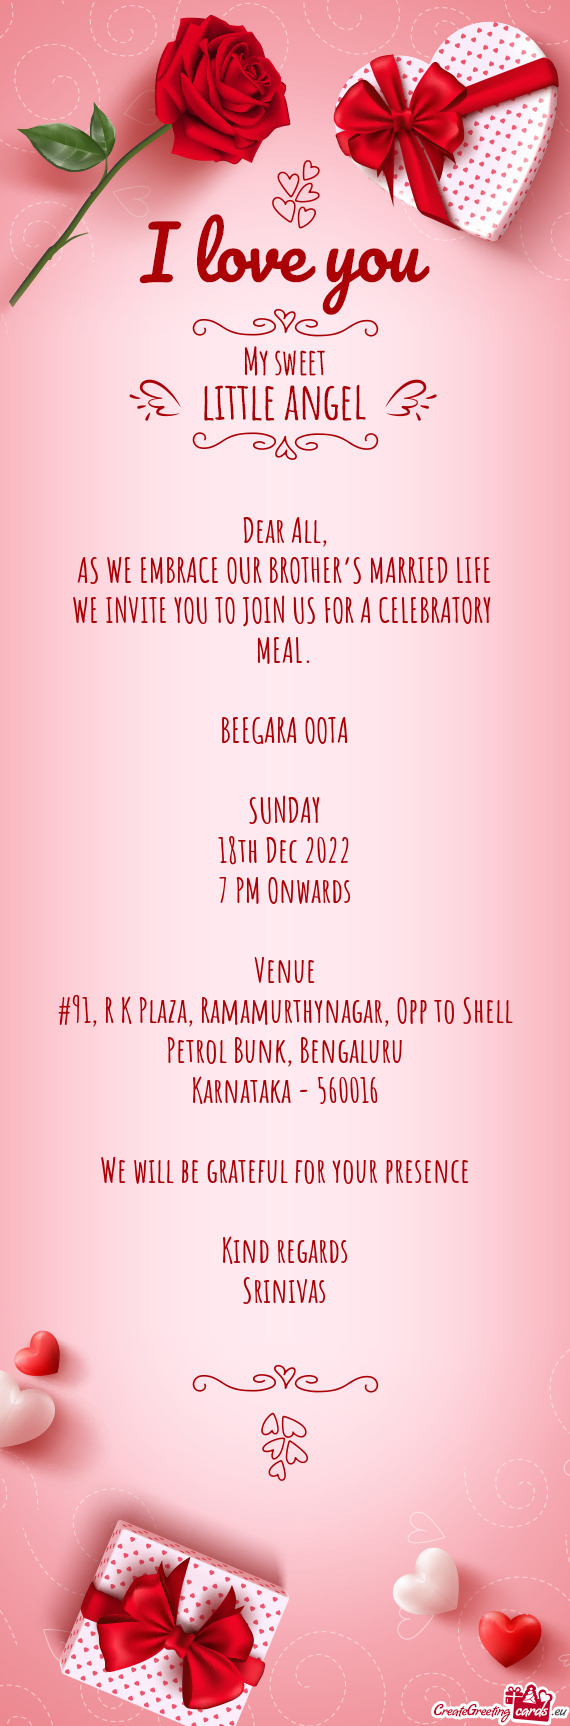 AS WE EMBRACE OUR BROTHER’S MARRIED LIFE WE INVITE YOU TO JOIN US FOR A CELEBRATORY MEAL